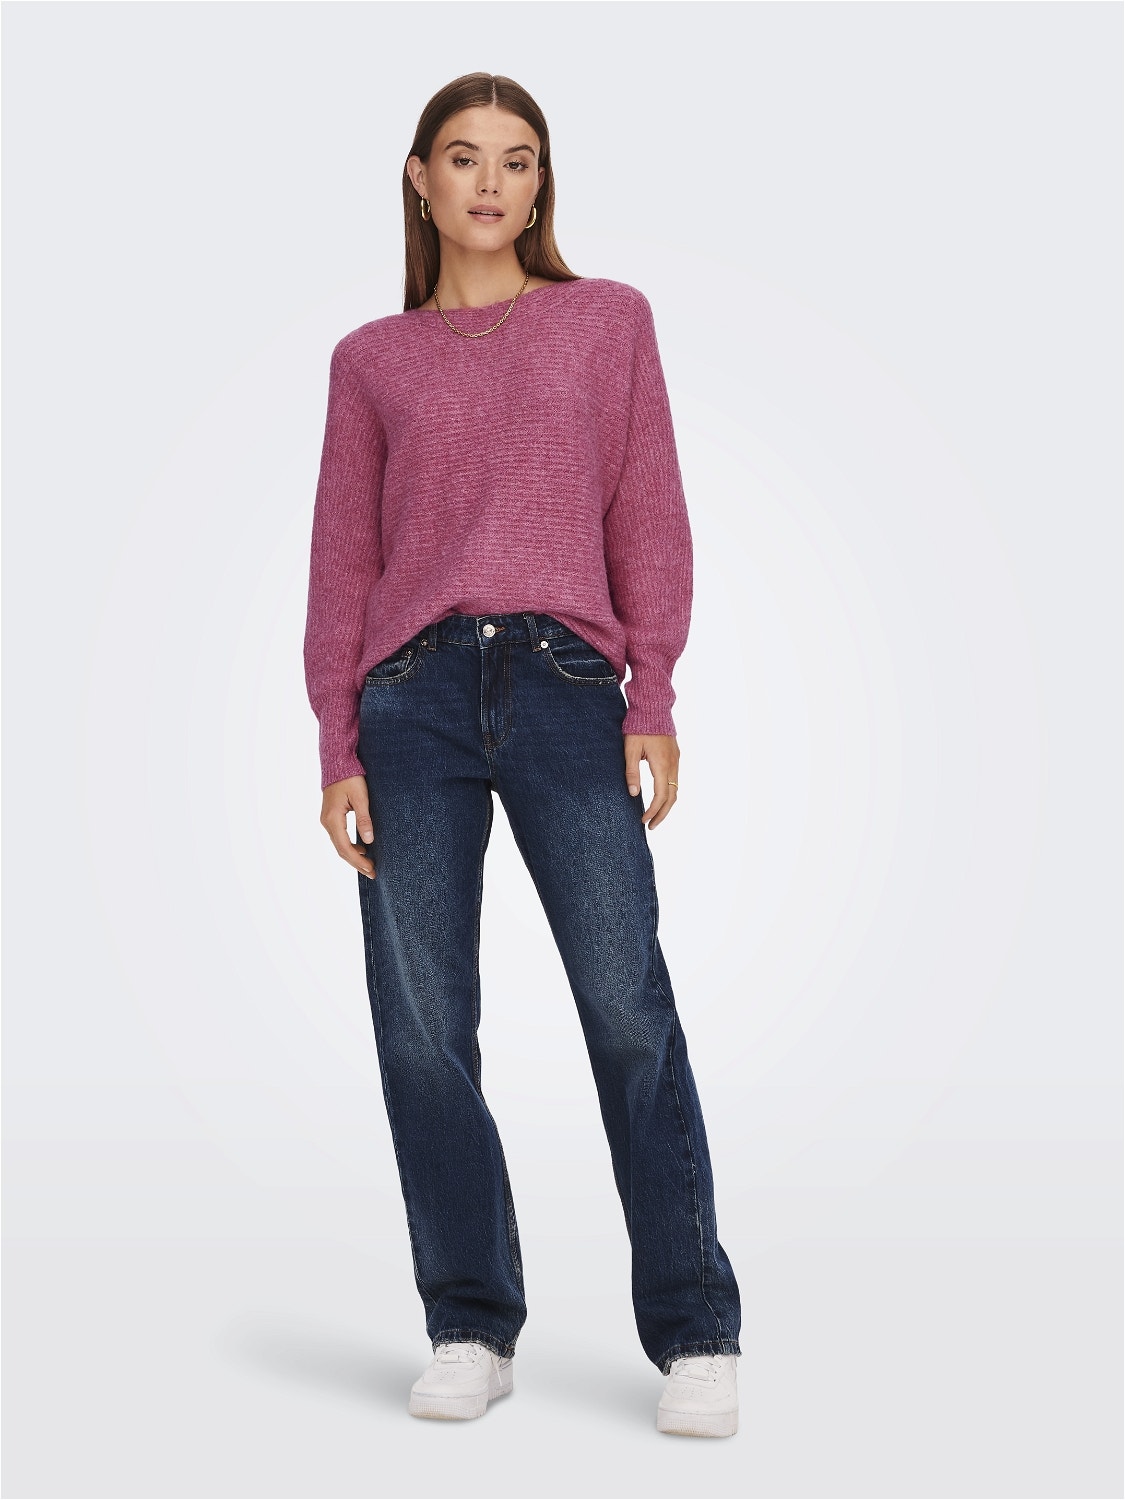 ONLY Batwing Knitted Pullover -Rapture Rose - 15168705